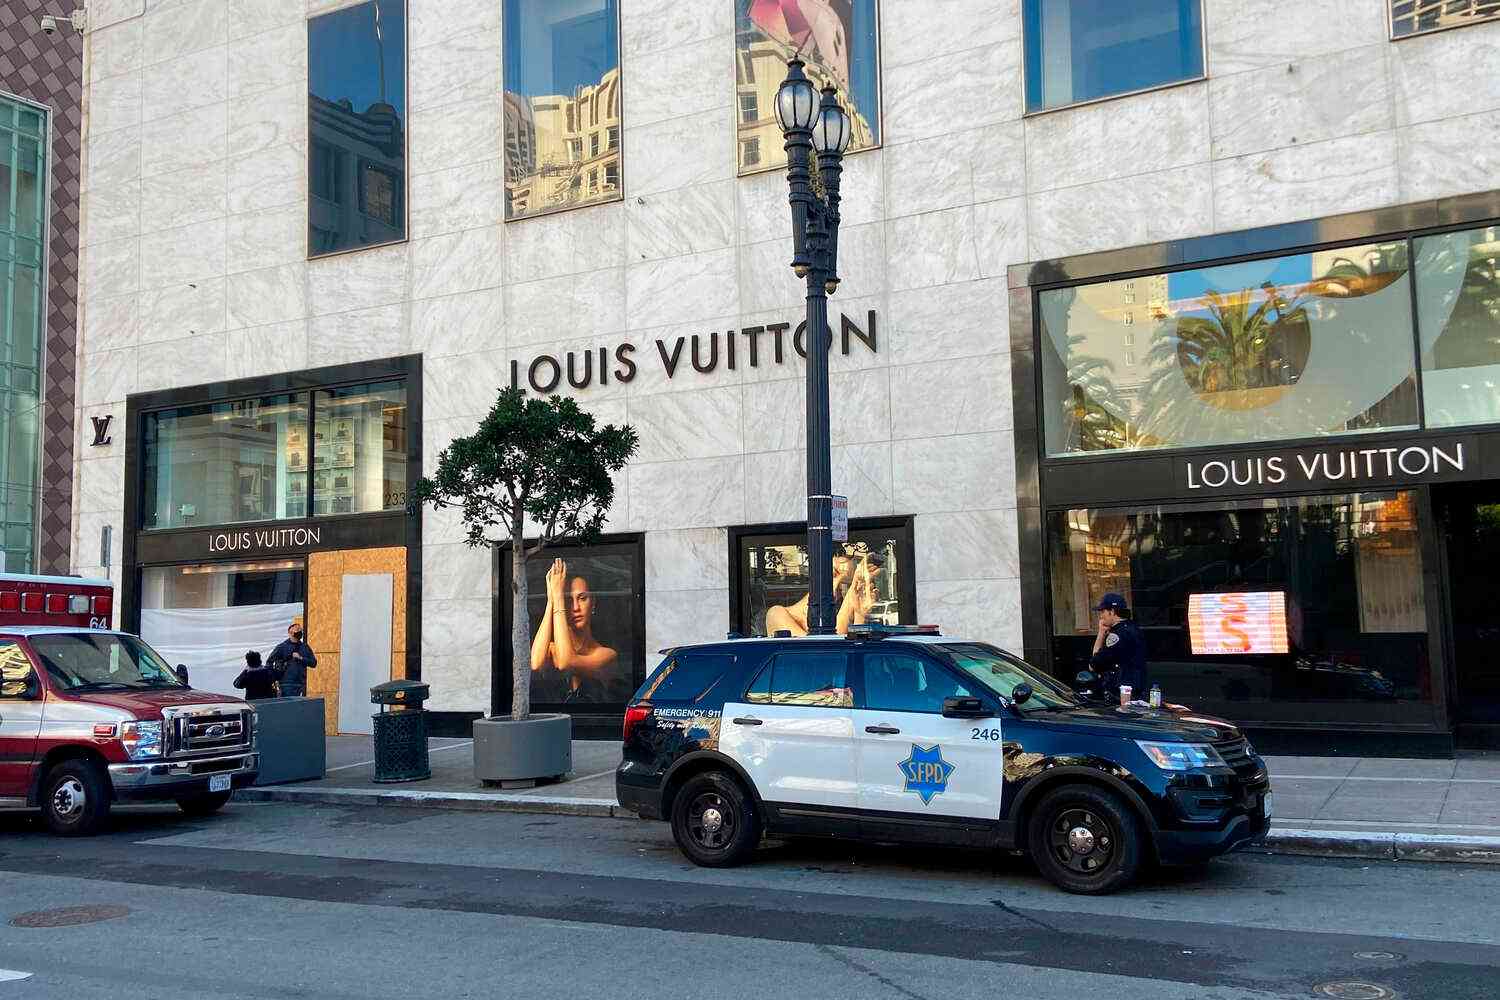 Thieves snatch diamonds, watches from sophisticated stores in upscale L.A. neighborhoods